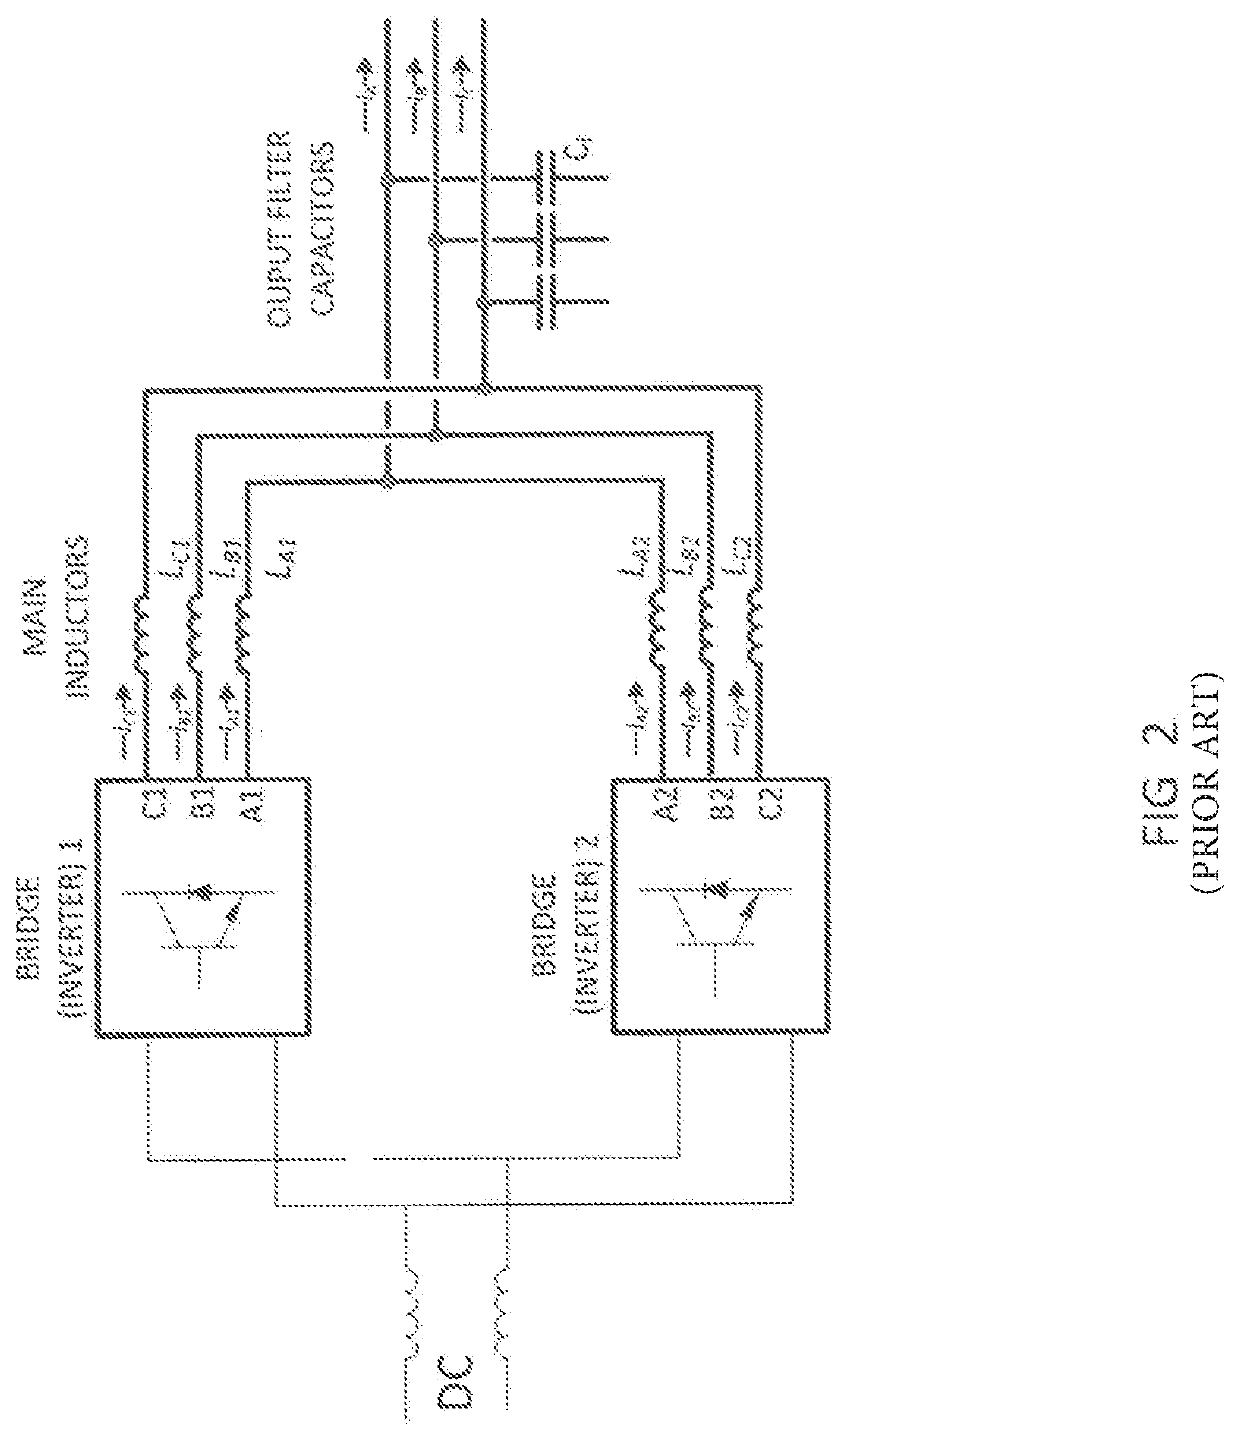 Interleaved parallel inverters with integrated filter inductor and interphase transformer